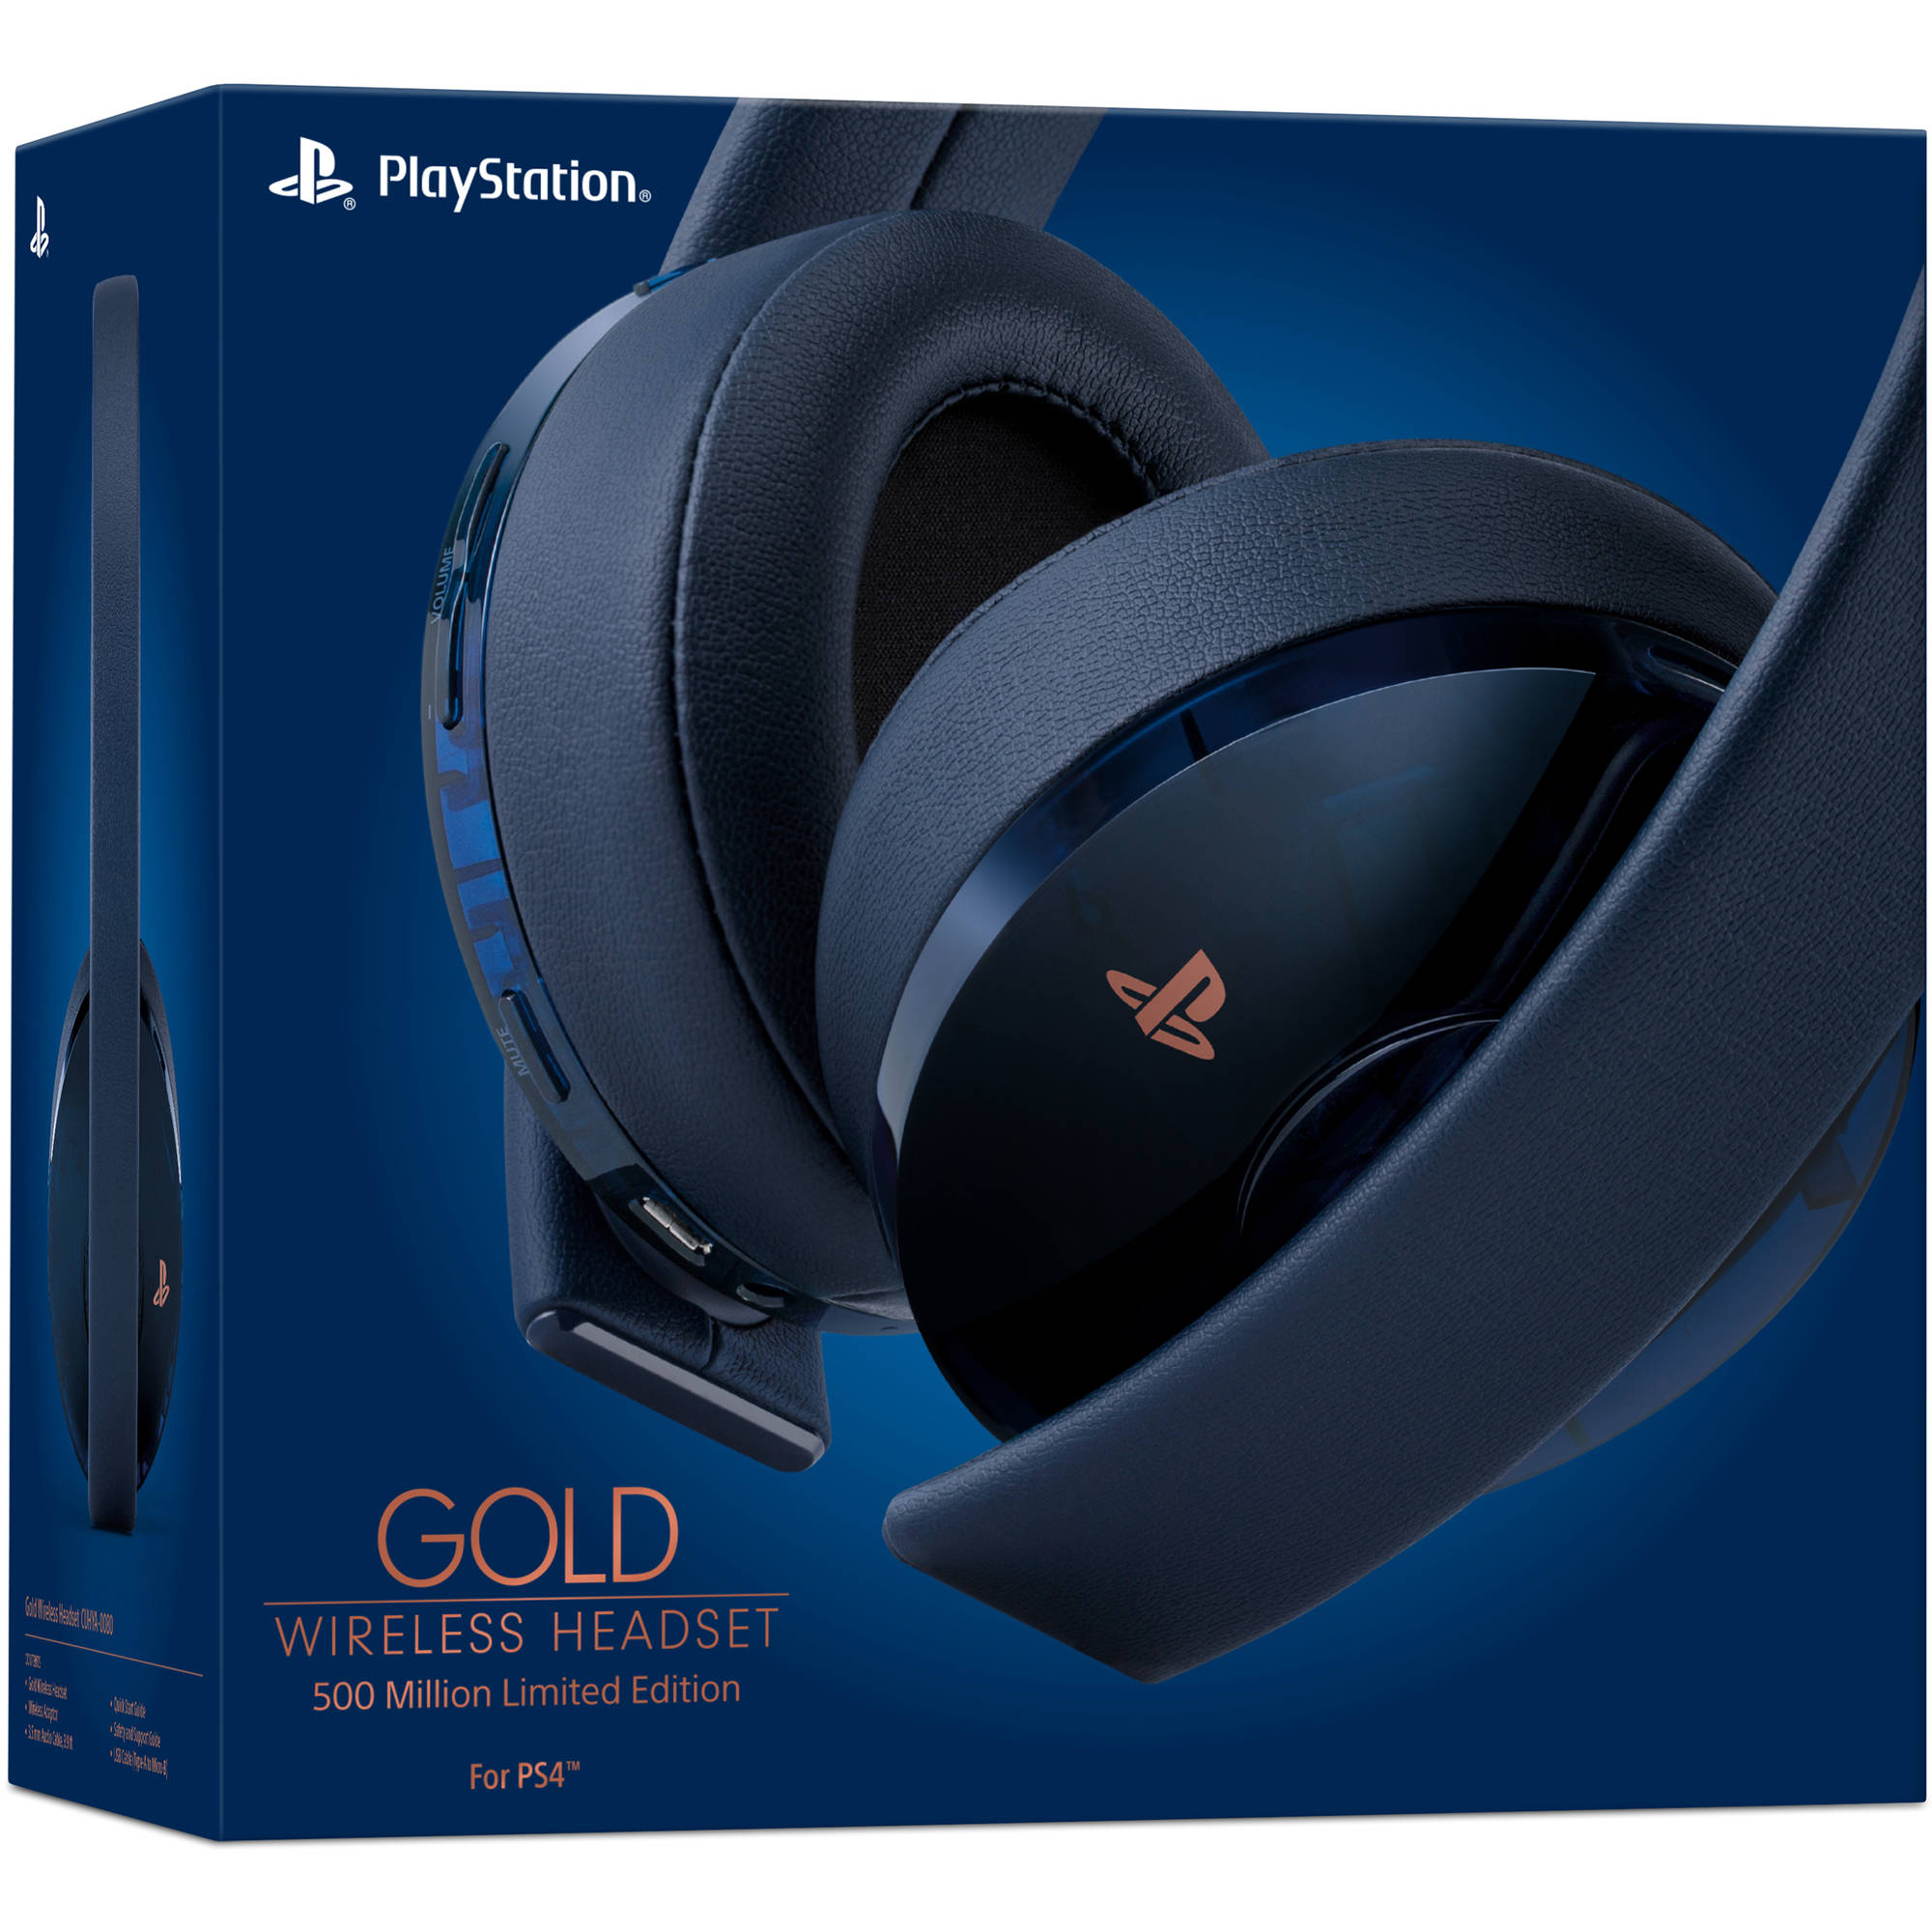 sony playstation 4 gold 7.1 wireless headset review